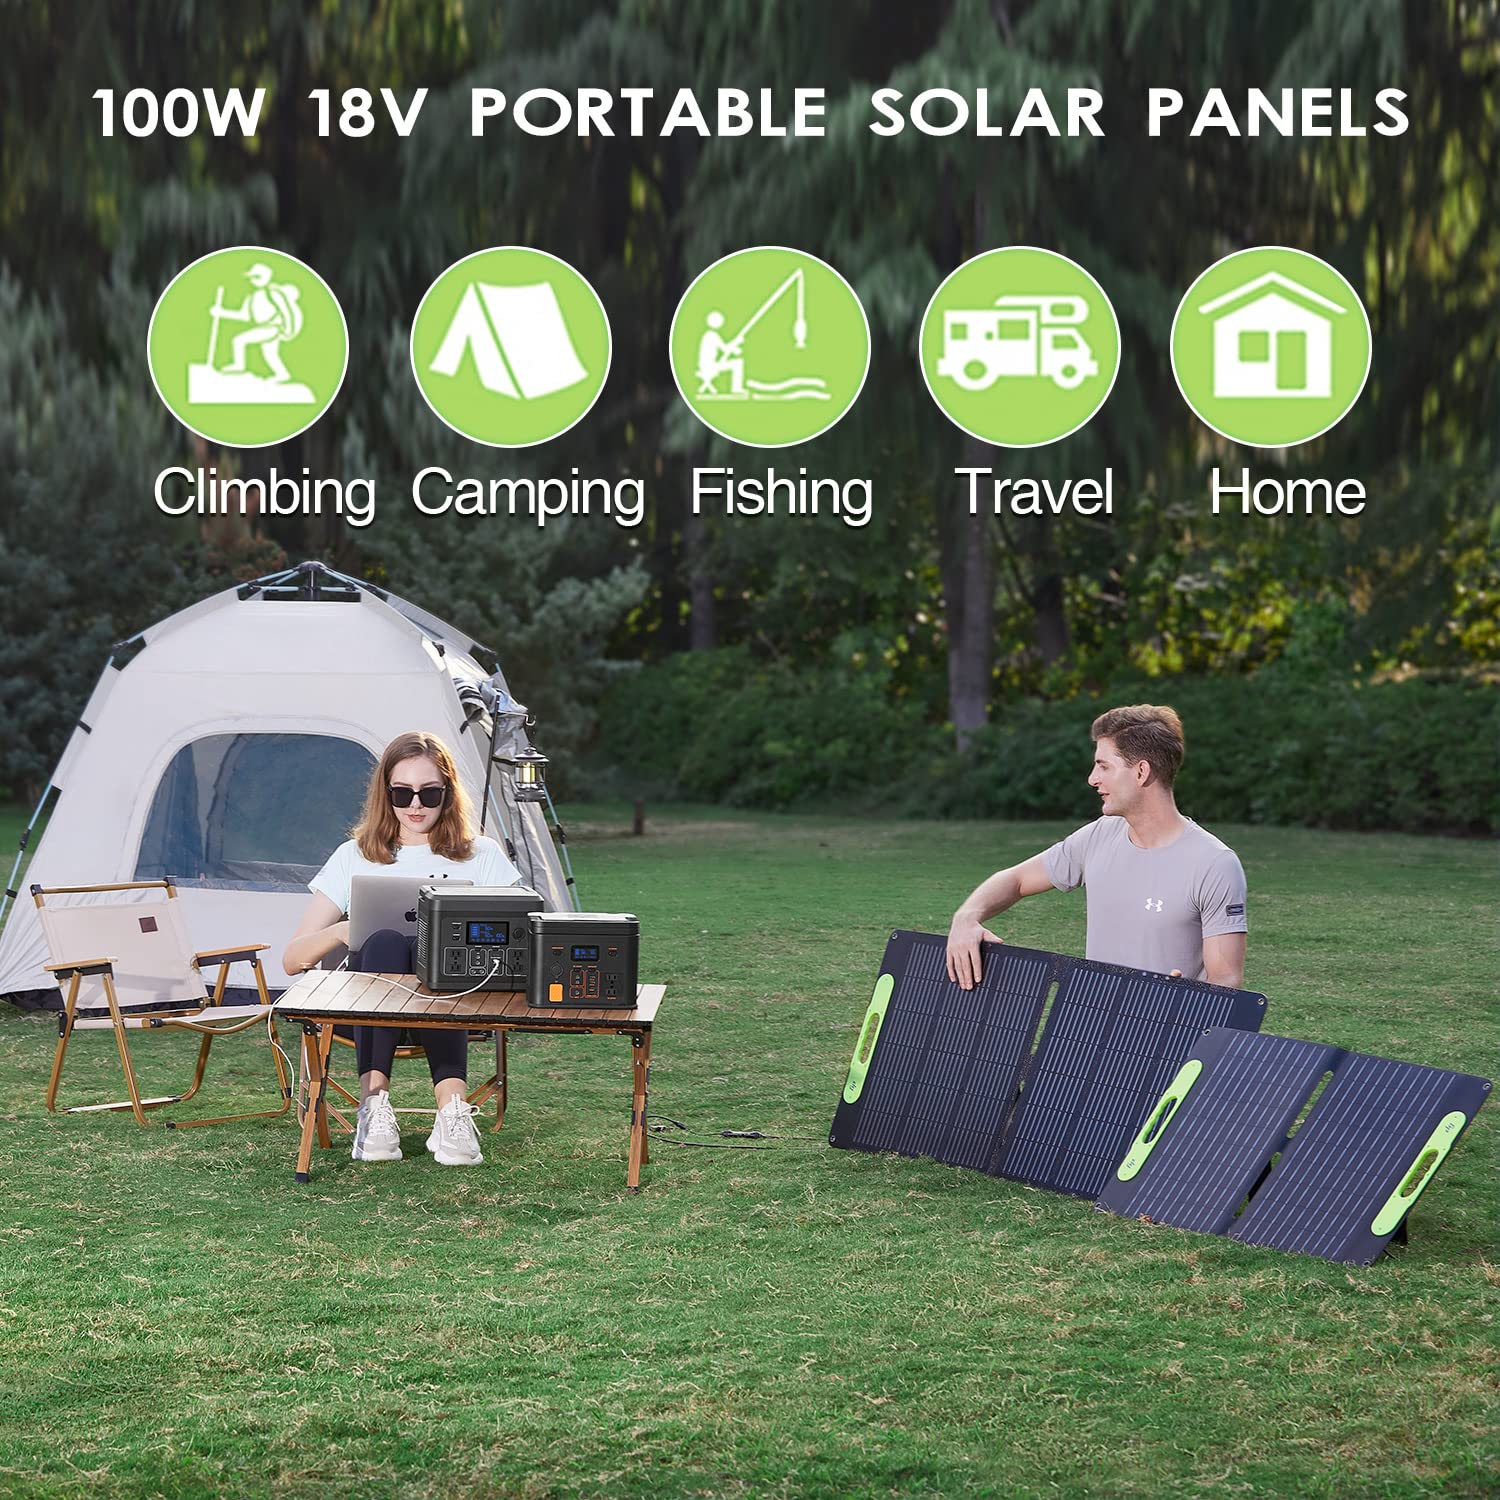 Green Power 100W Solar Panel Monocrystalline ETFE Cover Portable Foldable Solar Charger for Portable Power Station Generator USB QC 3.0, Typc C Output for Outdoor Camping Van RV Trip